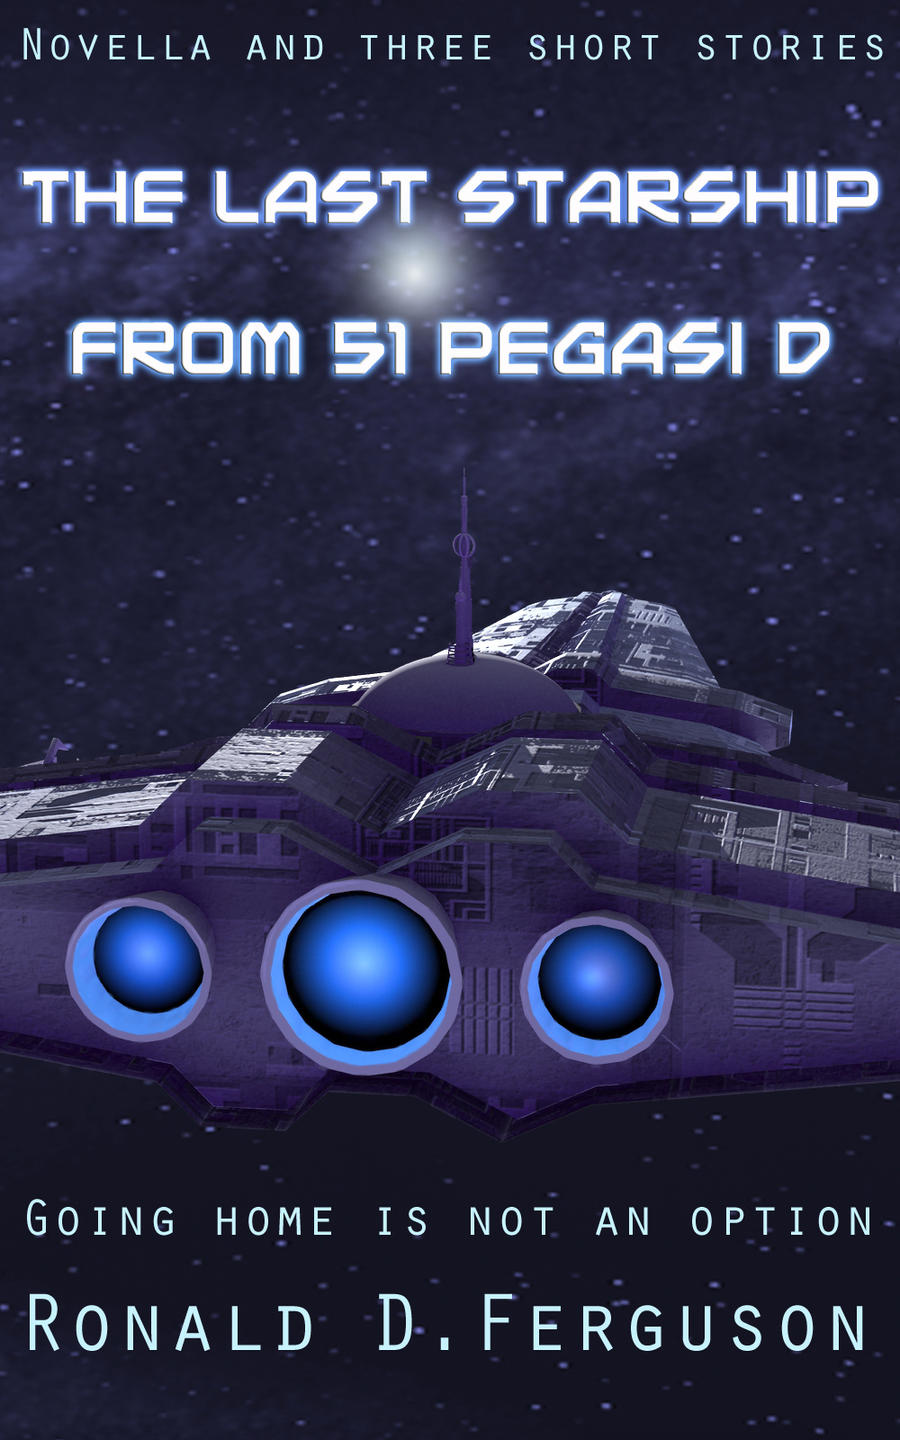 The Last Starship from 51 Pegasi D - ebook cover